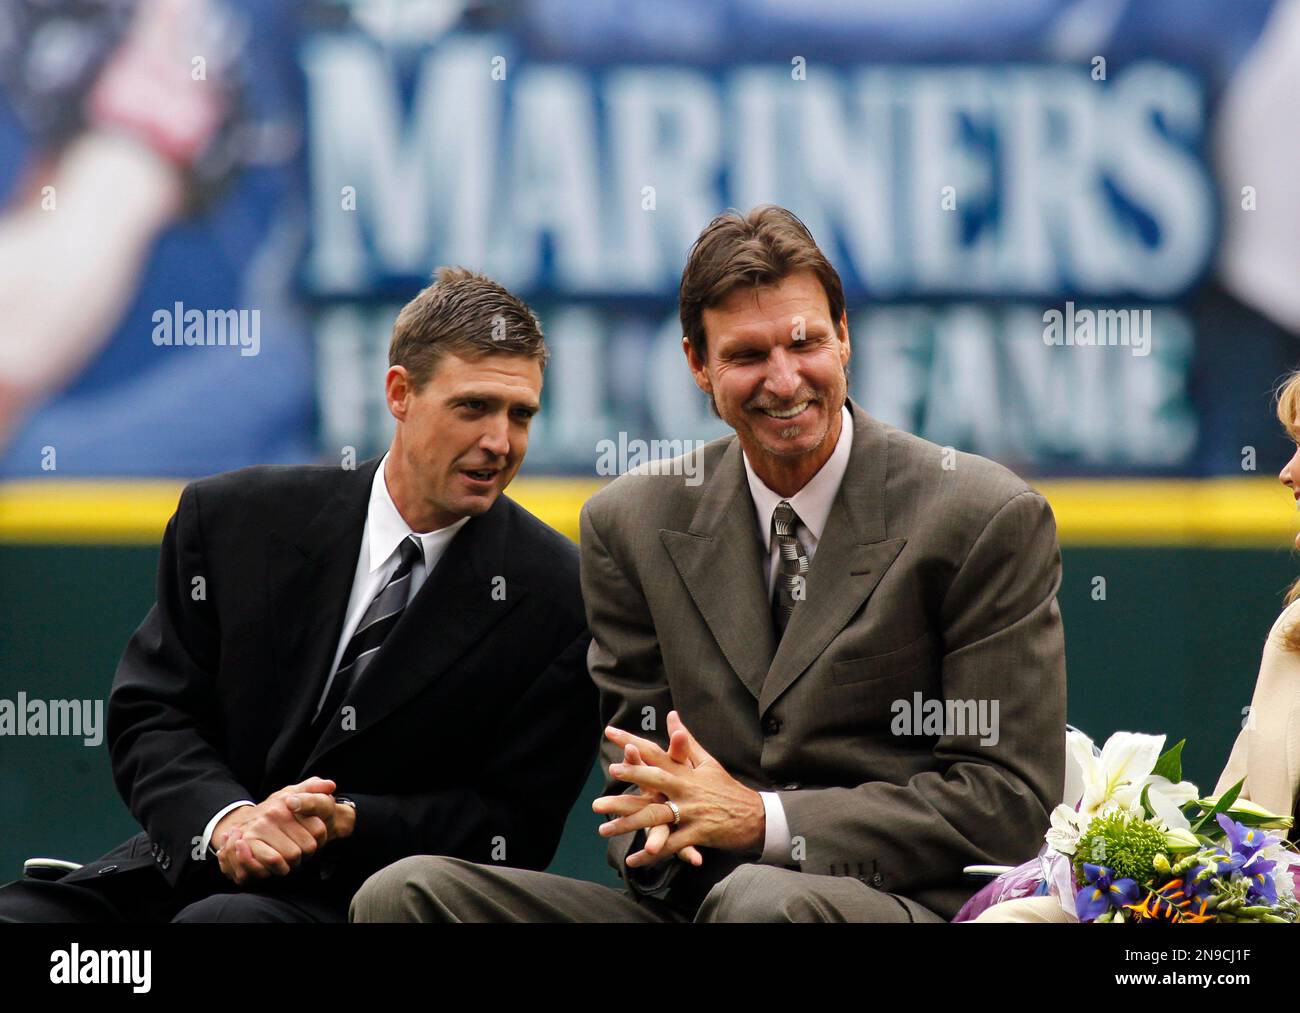 Randy Johnson to be Inducted Into the Mariner's Hall of Fame